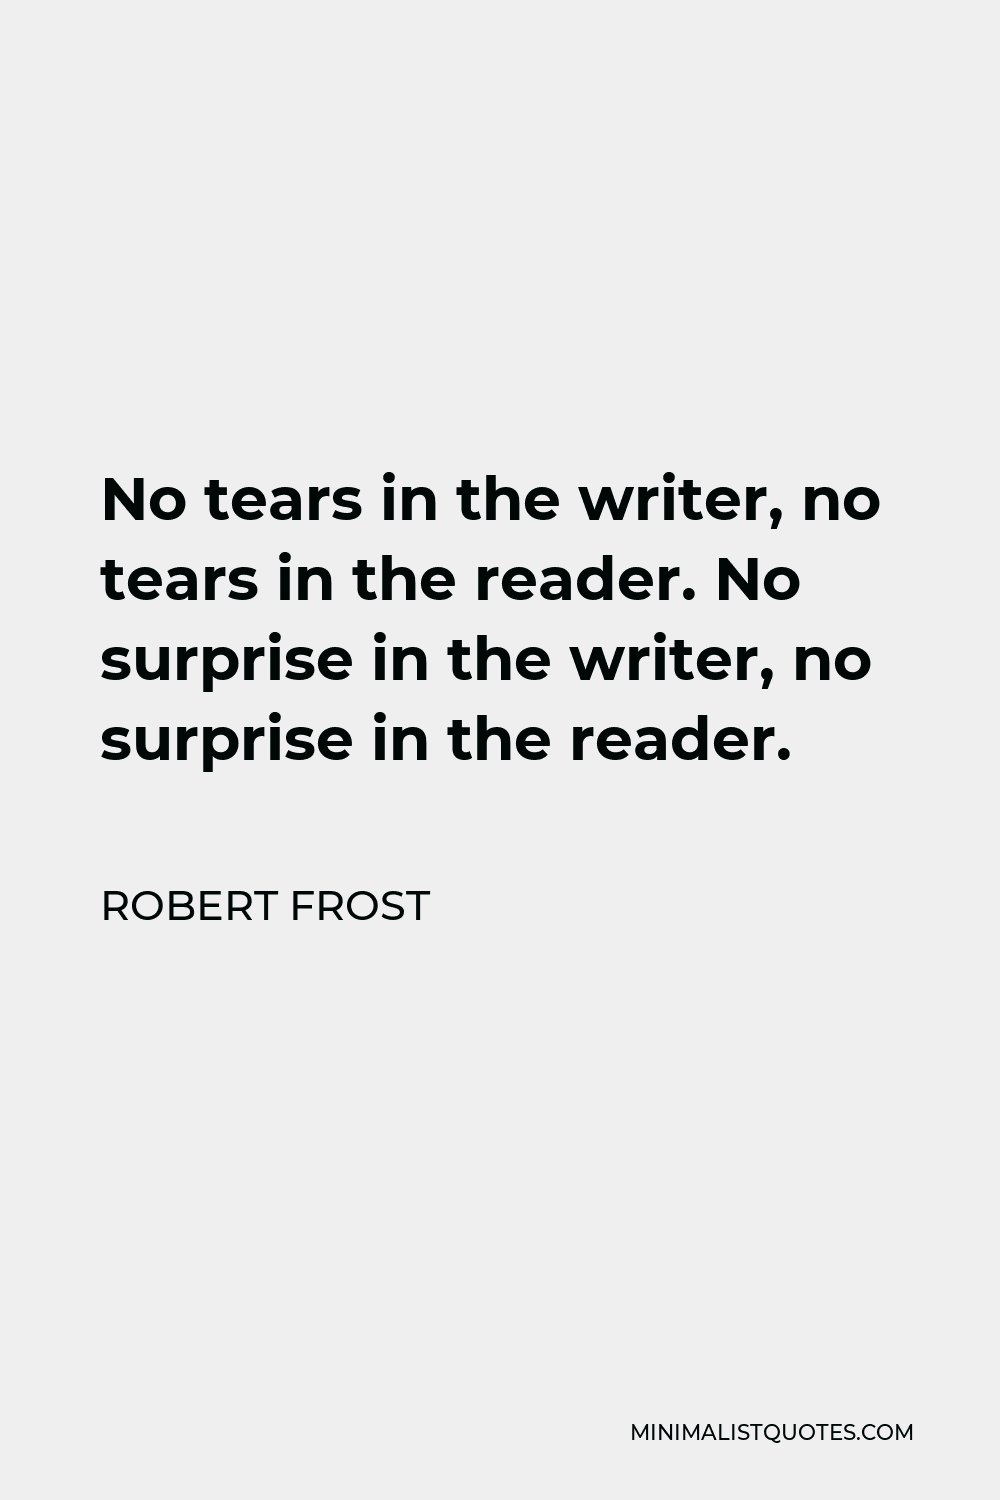 Robert Frost Quote - No tears in the writer, no tears in the reader. No surprise in the writer, no surprise in the reader.